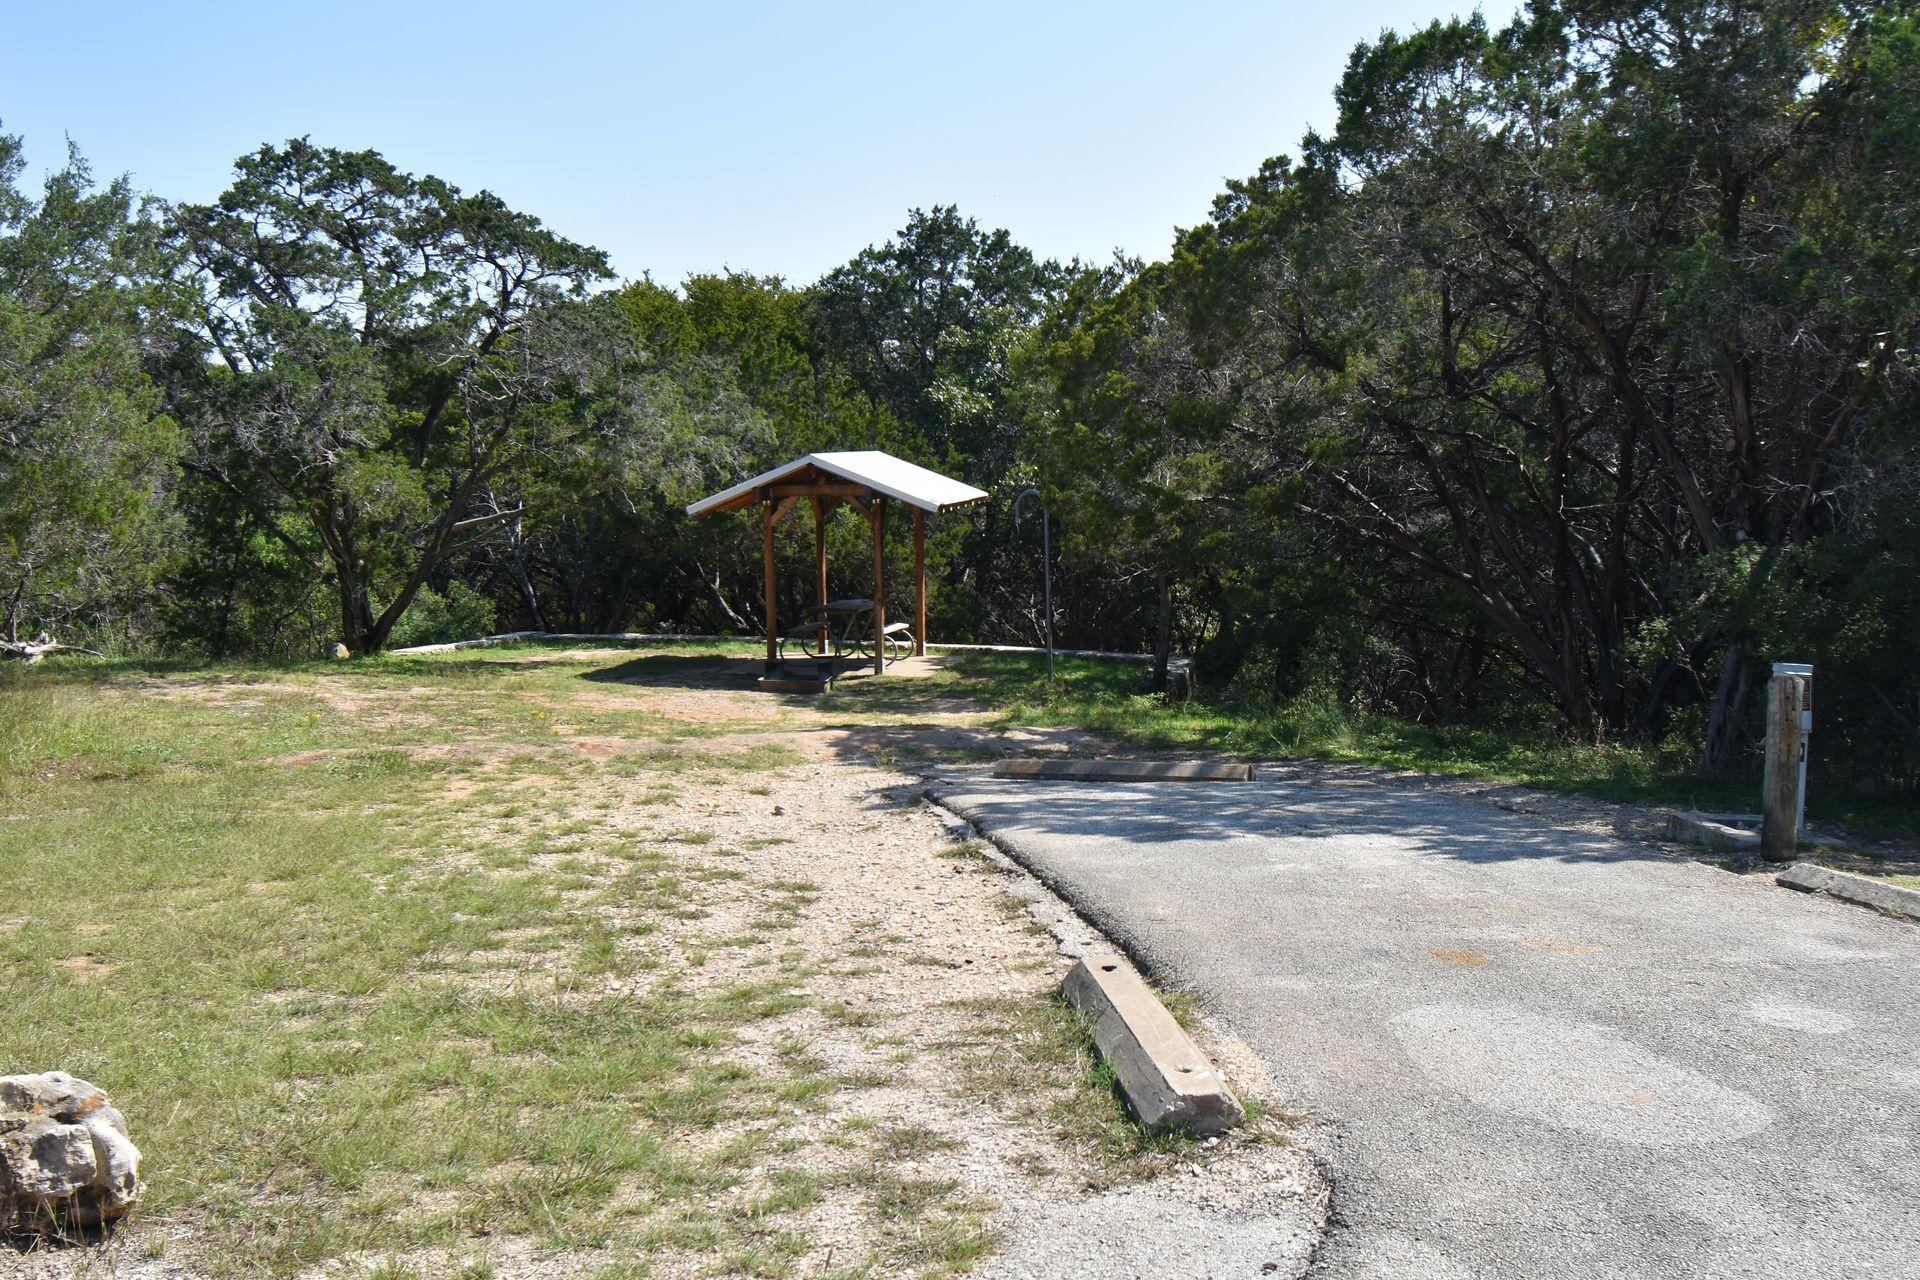 A campsite in Pedernales Falls with a shelter and forest in the background